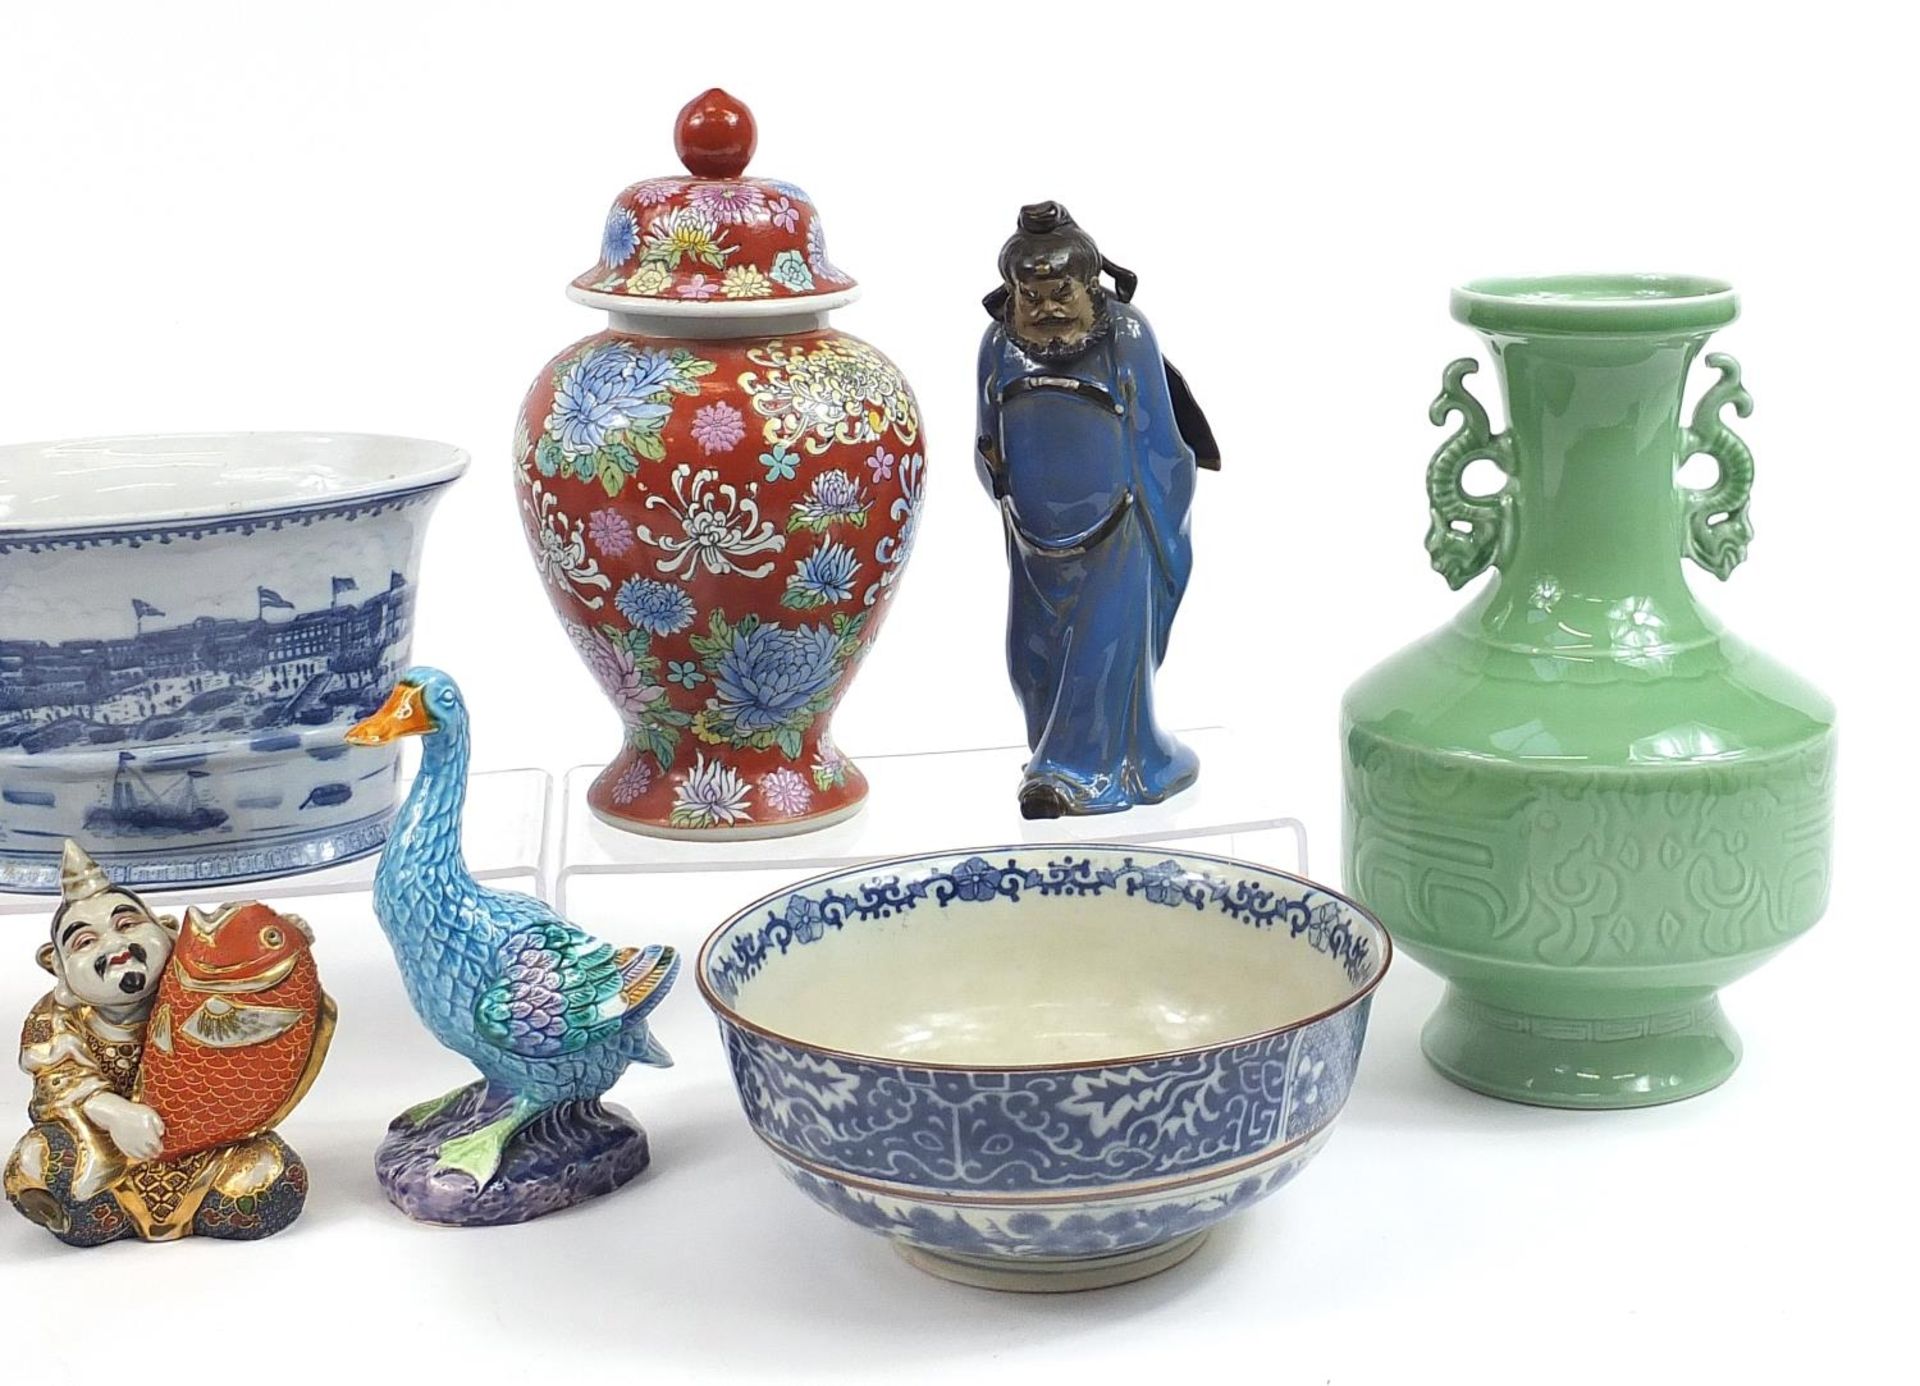 Chinese and Japanese ceramics including a pair of ducks, celadon glazed vase and baluster vase - Image 3 of 3